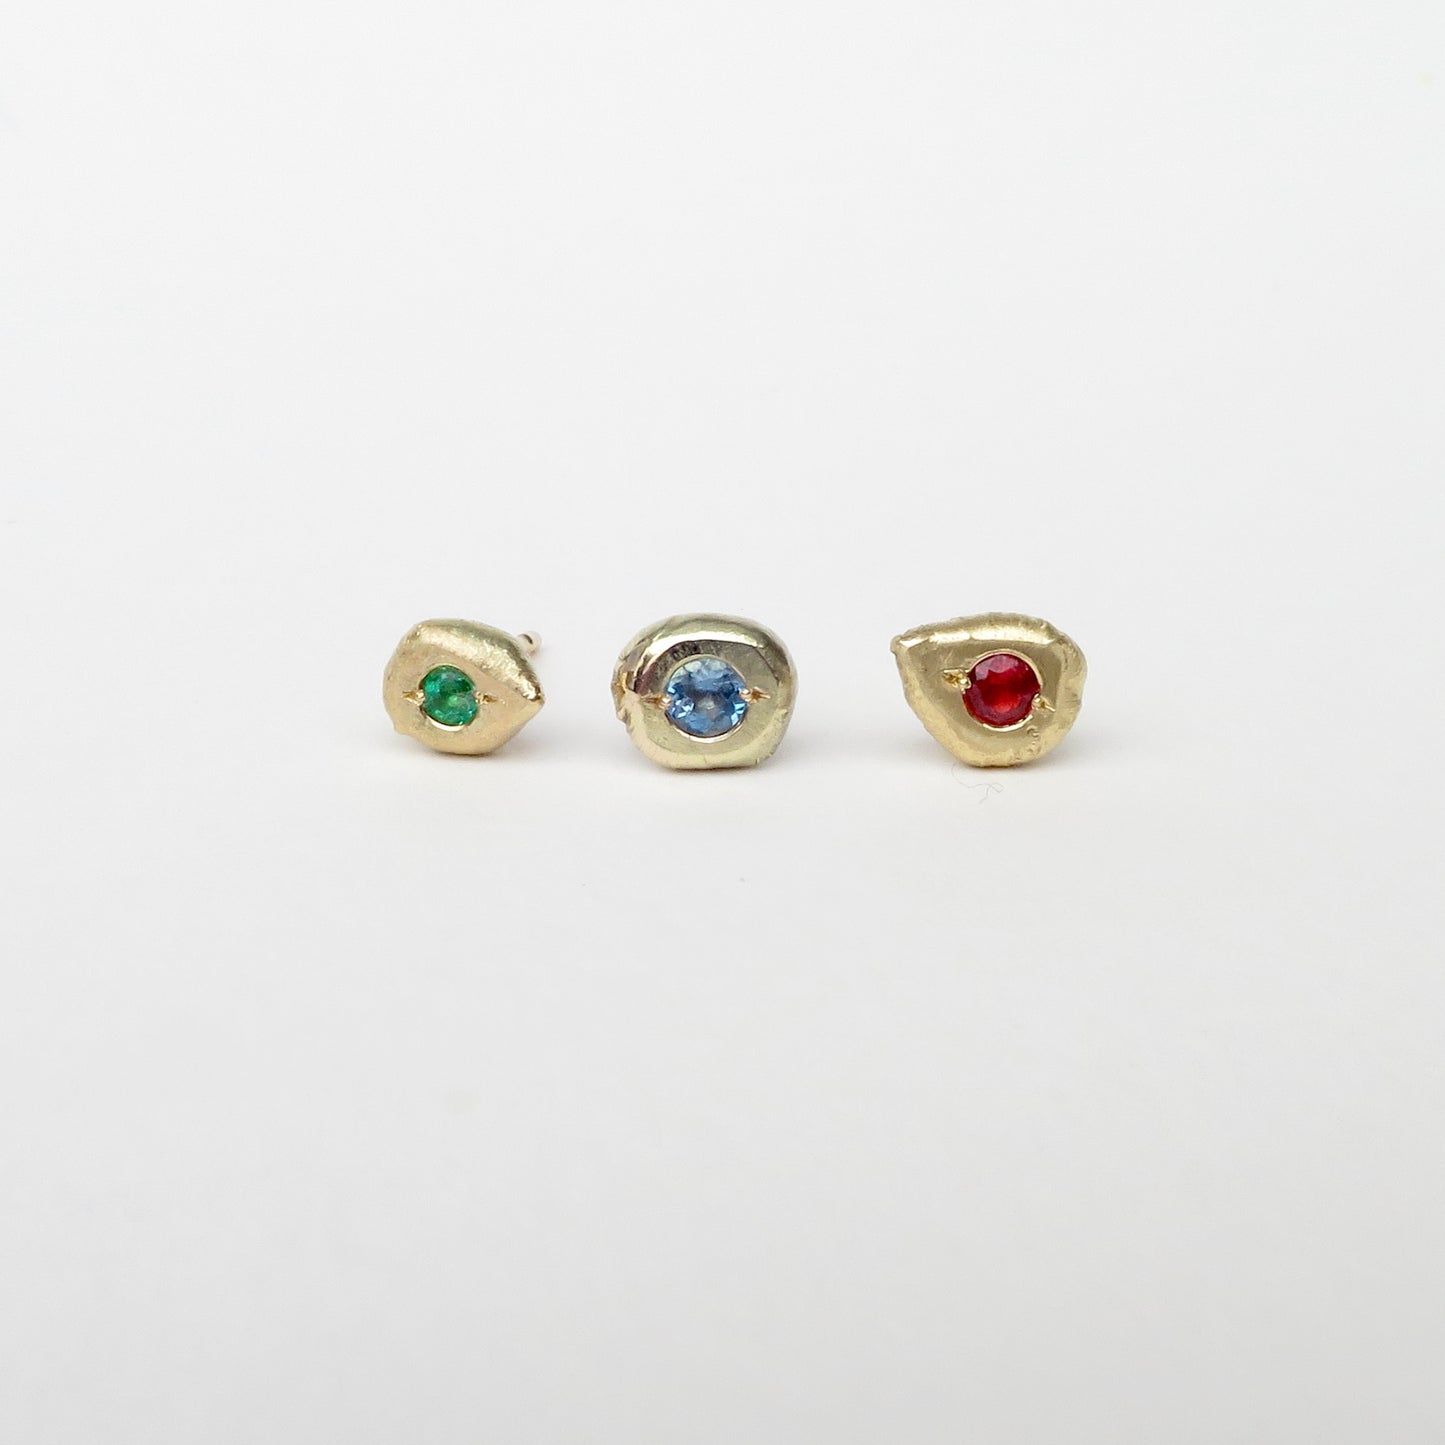 Freeform 9ct gold studs with emerald